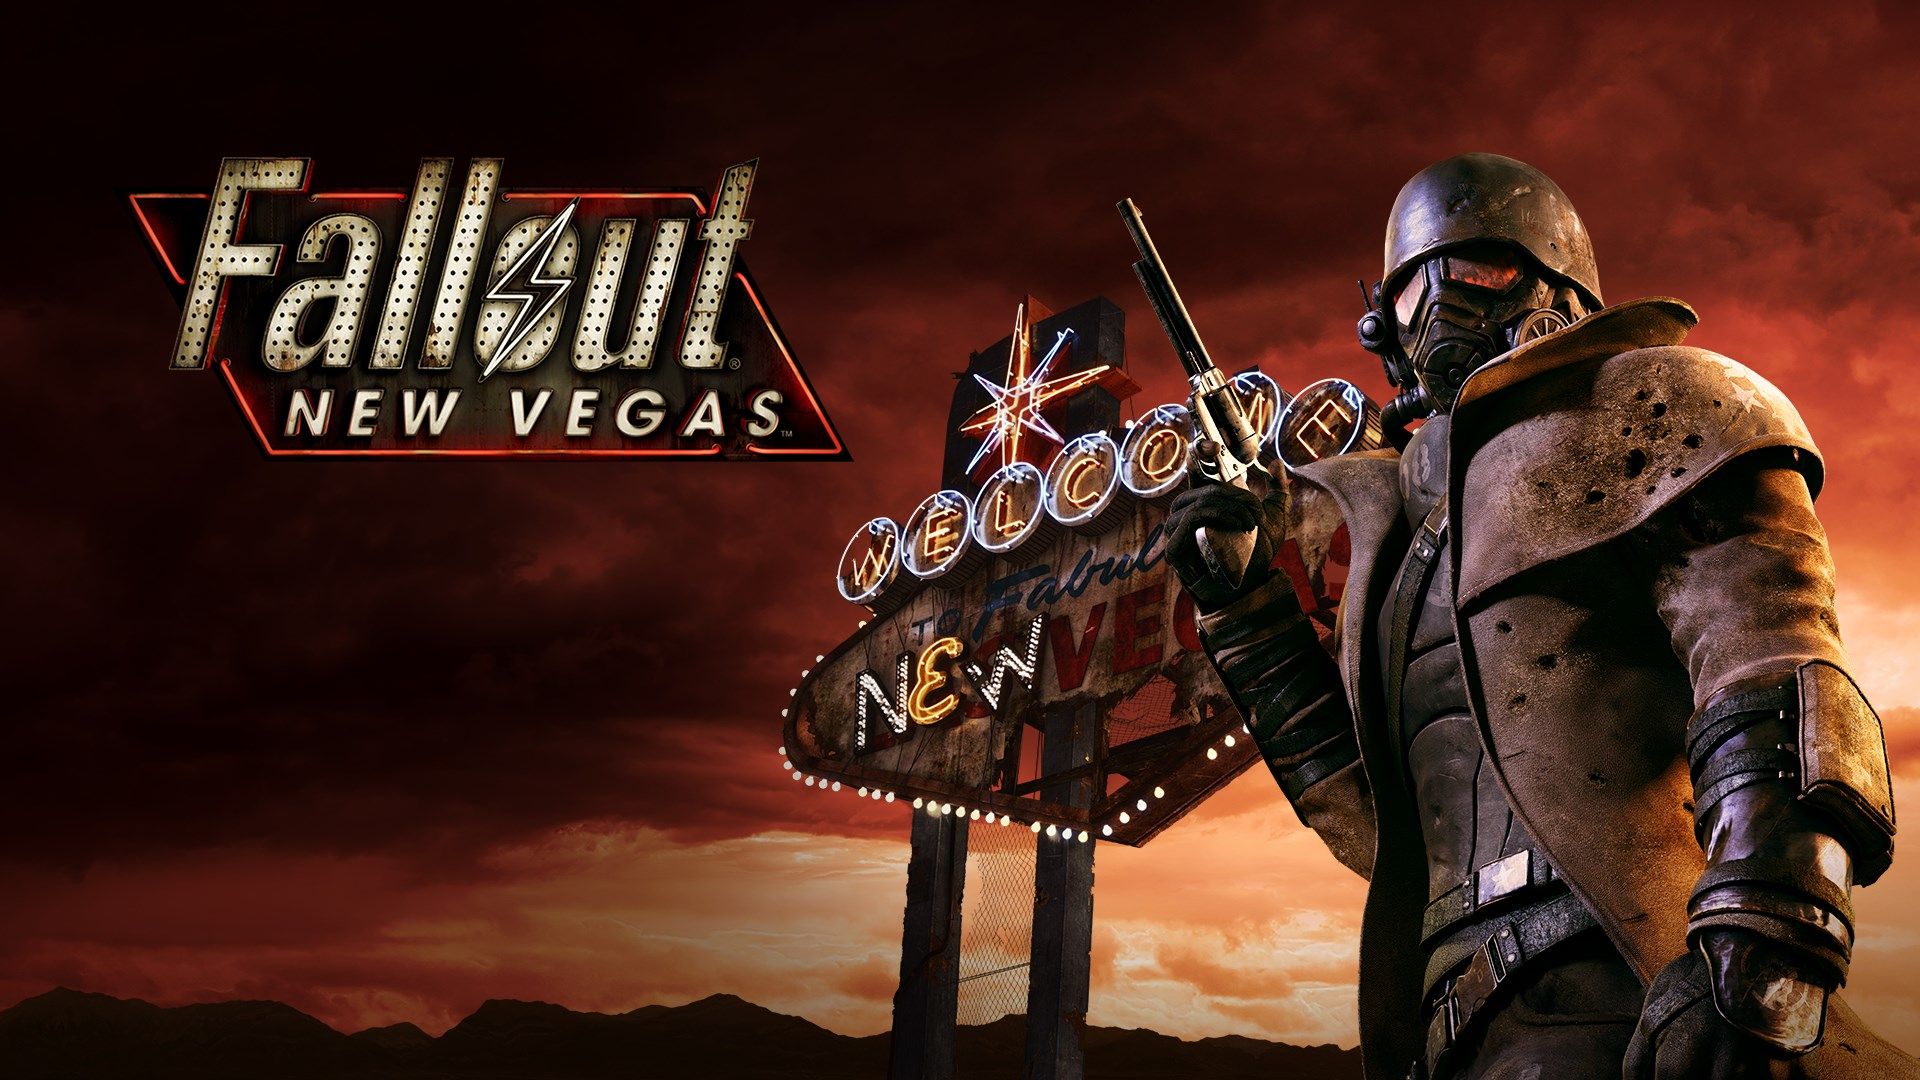 In Fallout New Vegas, I failed Render Unto Caesar. How can I recover and do the quest anyway?